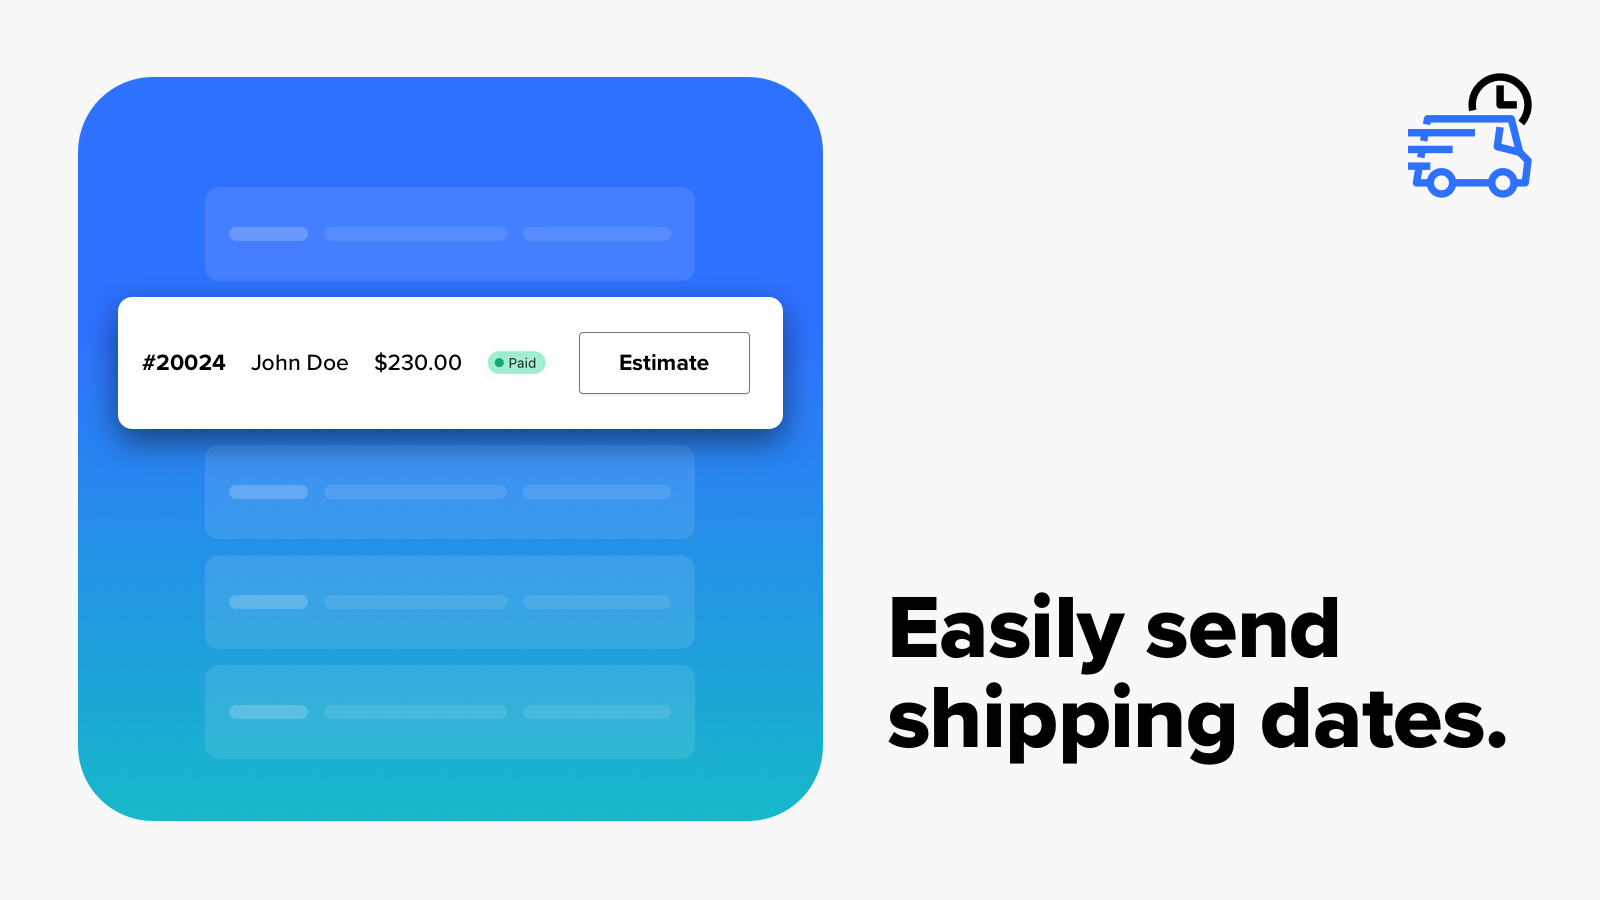 Select an order to easily send the shipping date.